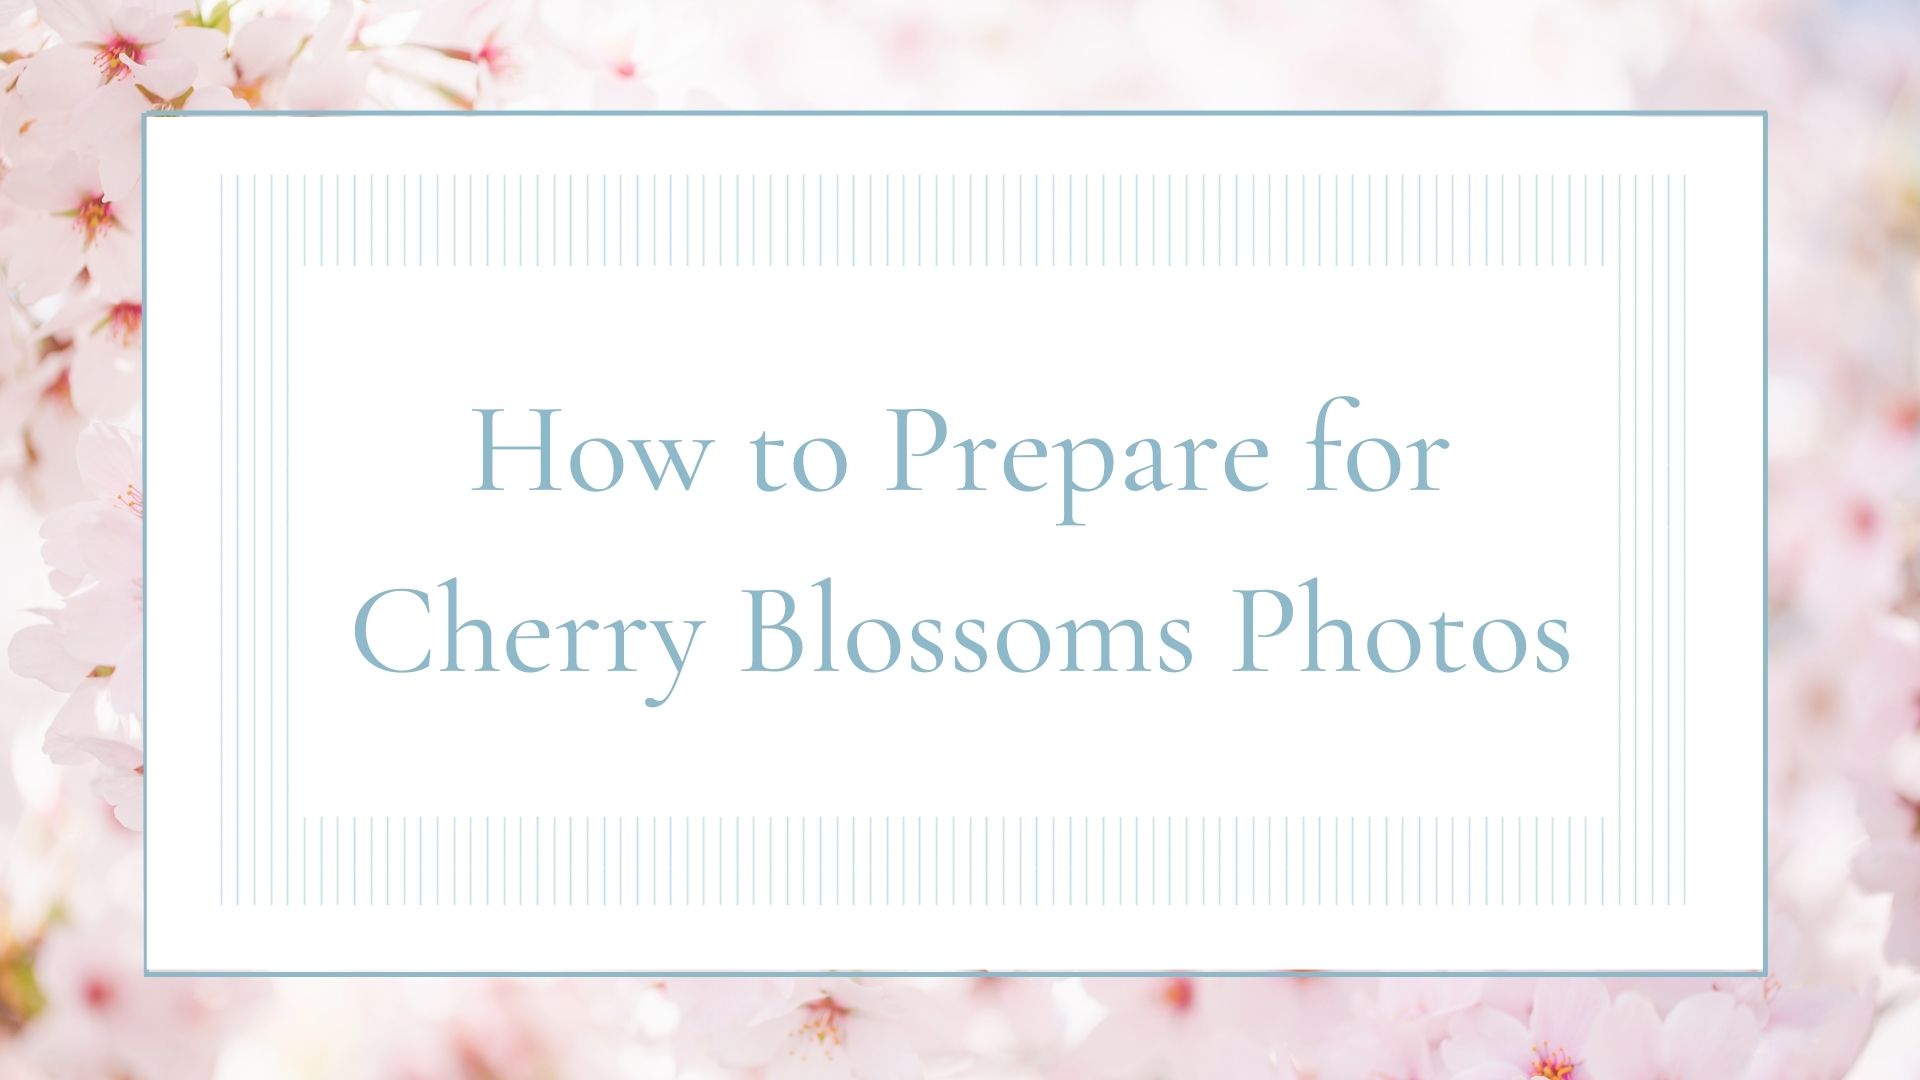 how to prepare for cherry blossoms photos, tips for cherry blossoms season, DC cherry blossoms photography, DC cherry blossoms photographer, photo session tips, cherry blossoms photos tips, DC cherry blossoms, Rachel E.H. Photography